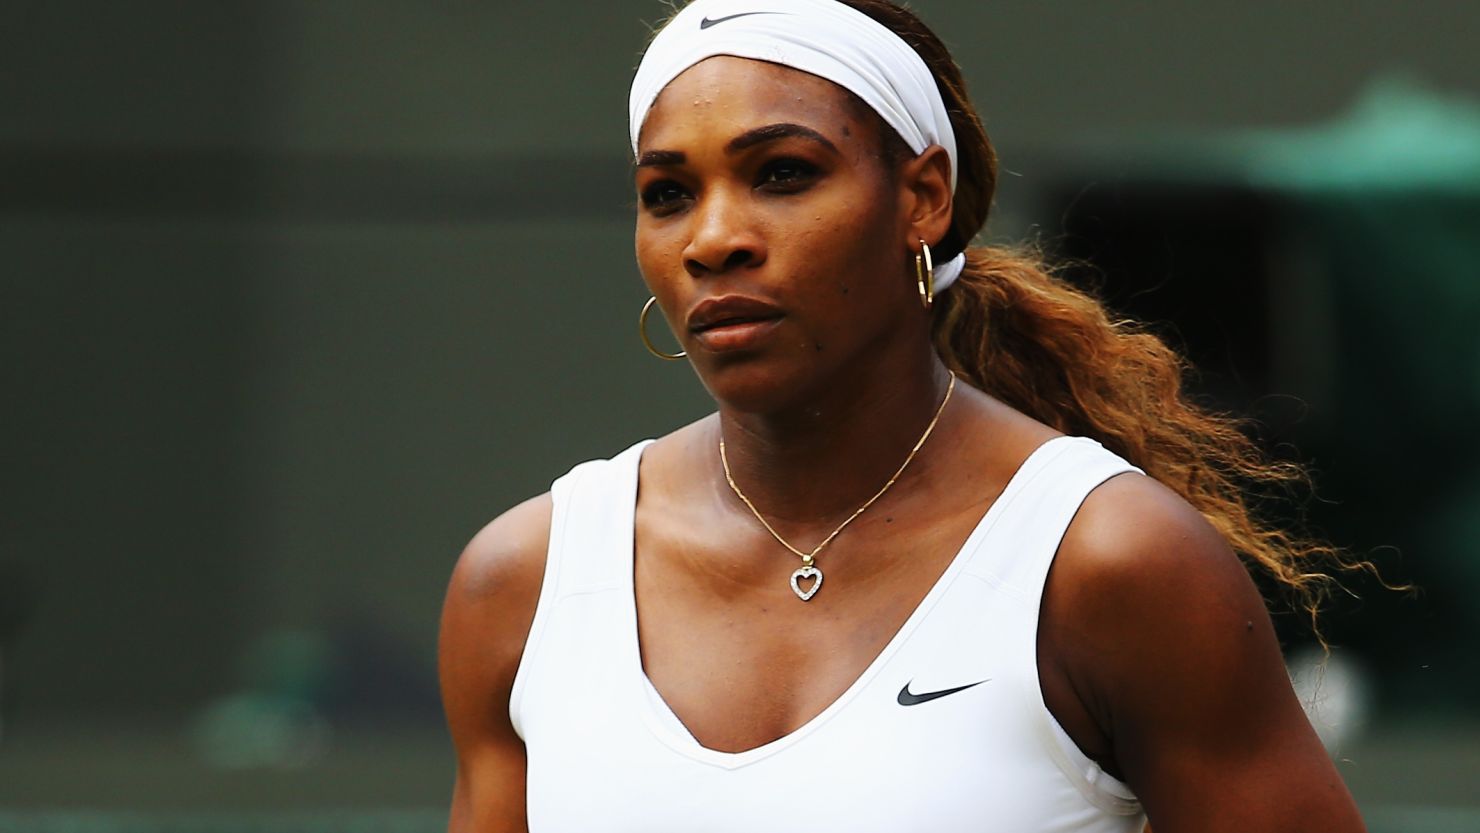 Serena Williams acknowledges she's the favorite for the Wimbledon title as she chases a sixth crown.